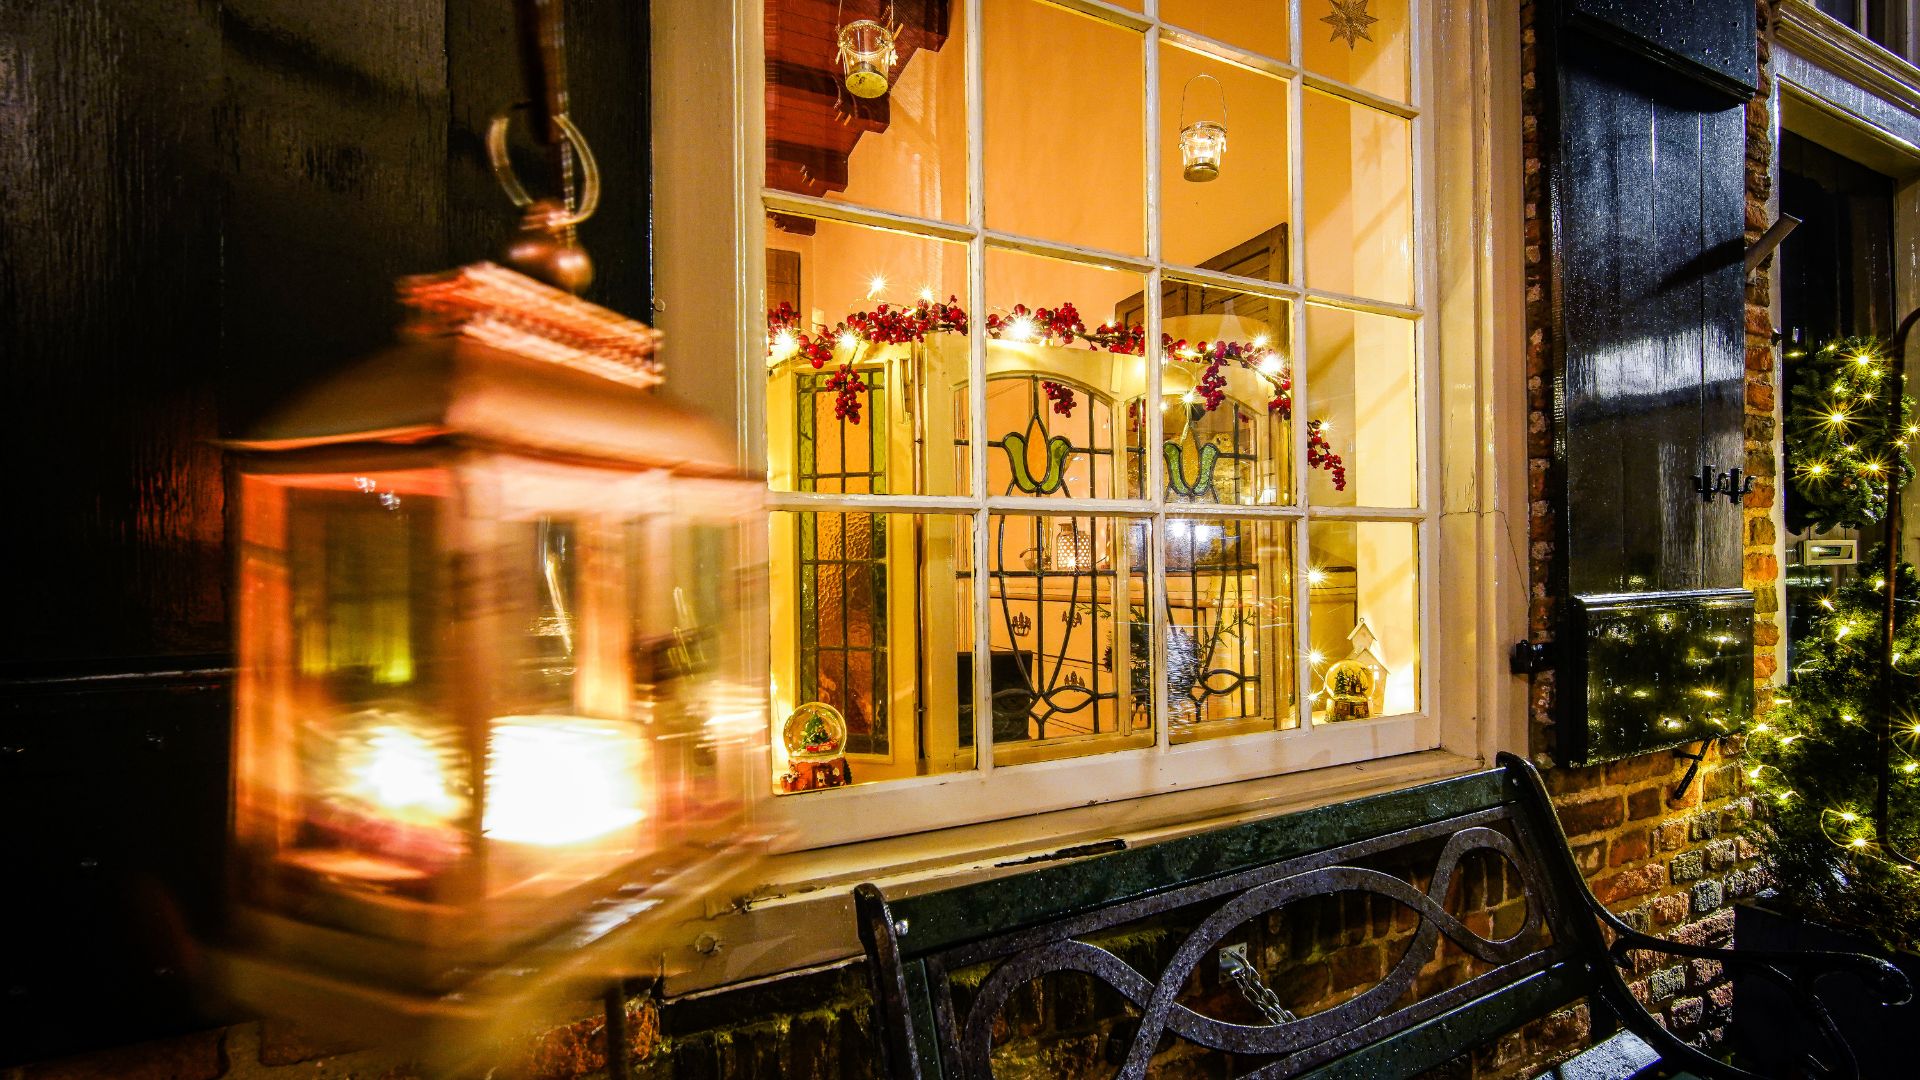  View inside shop window with vintage stained glass panels, old-fashioned light outdoors, and metal bench